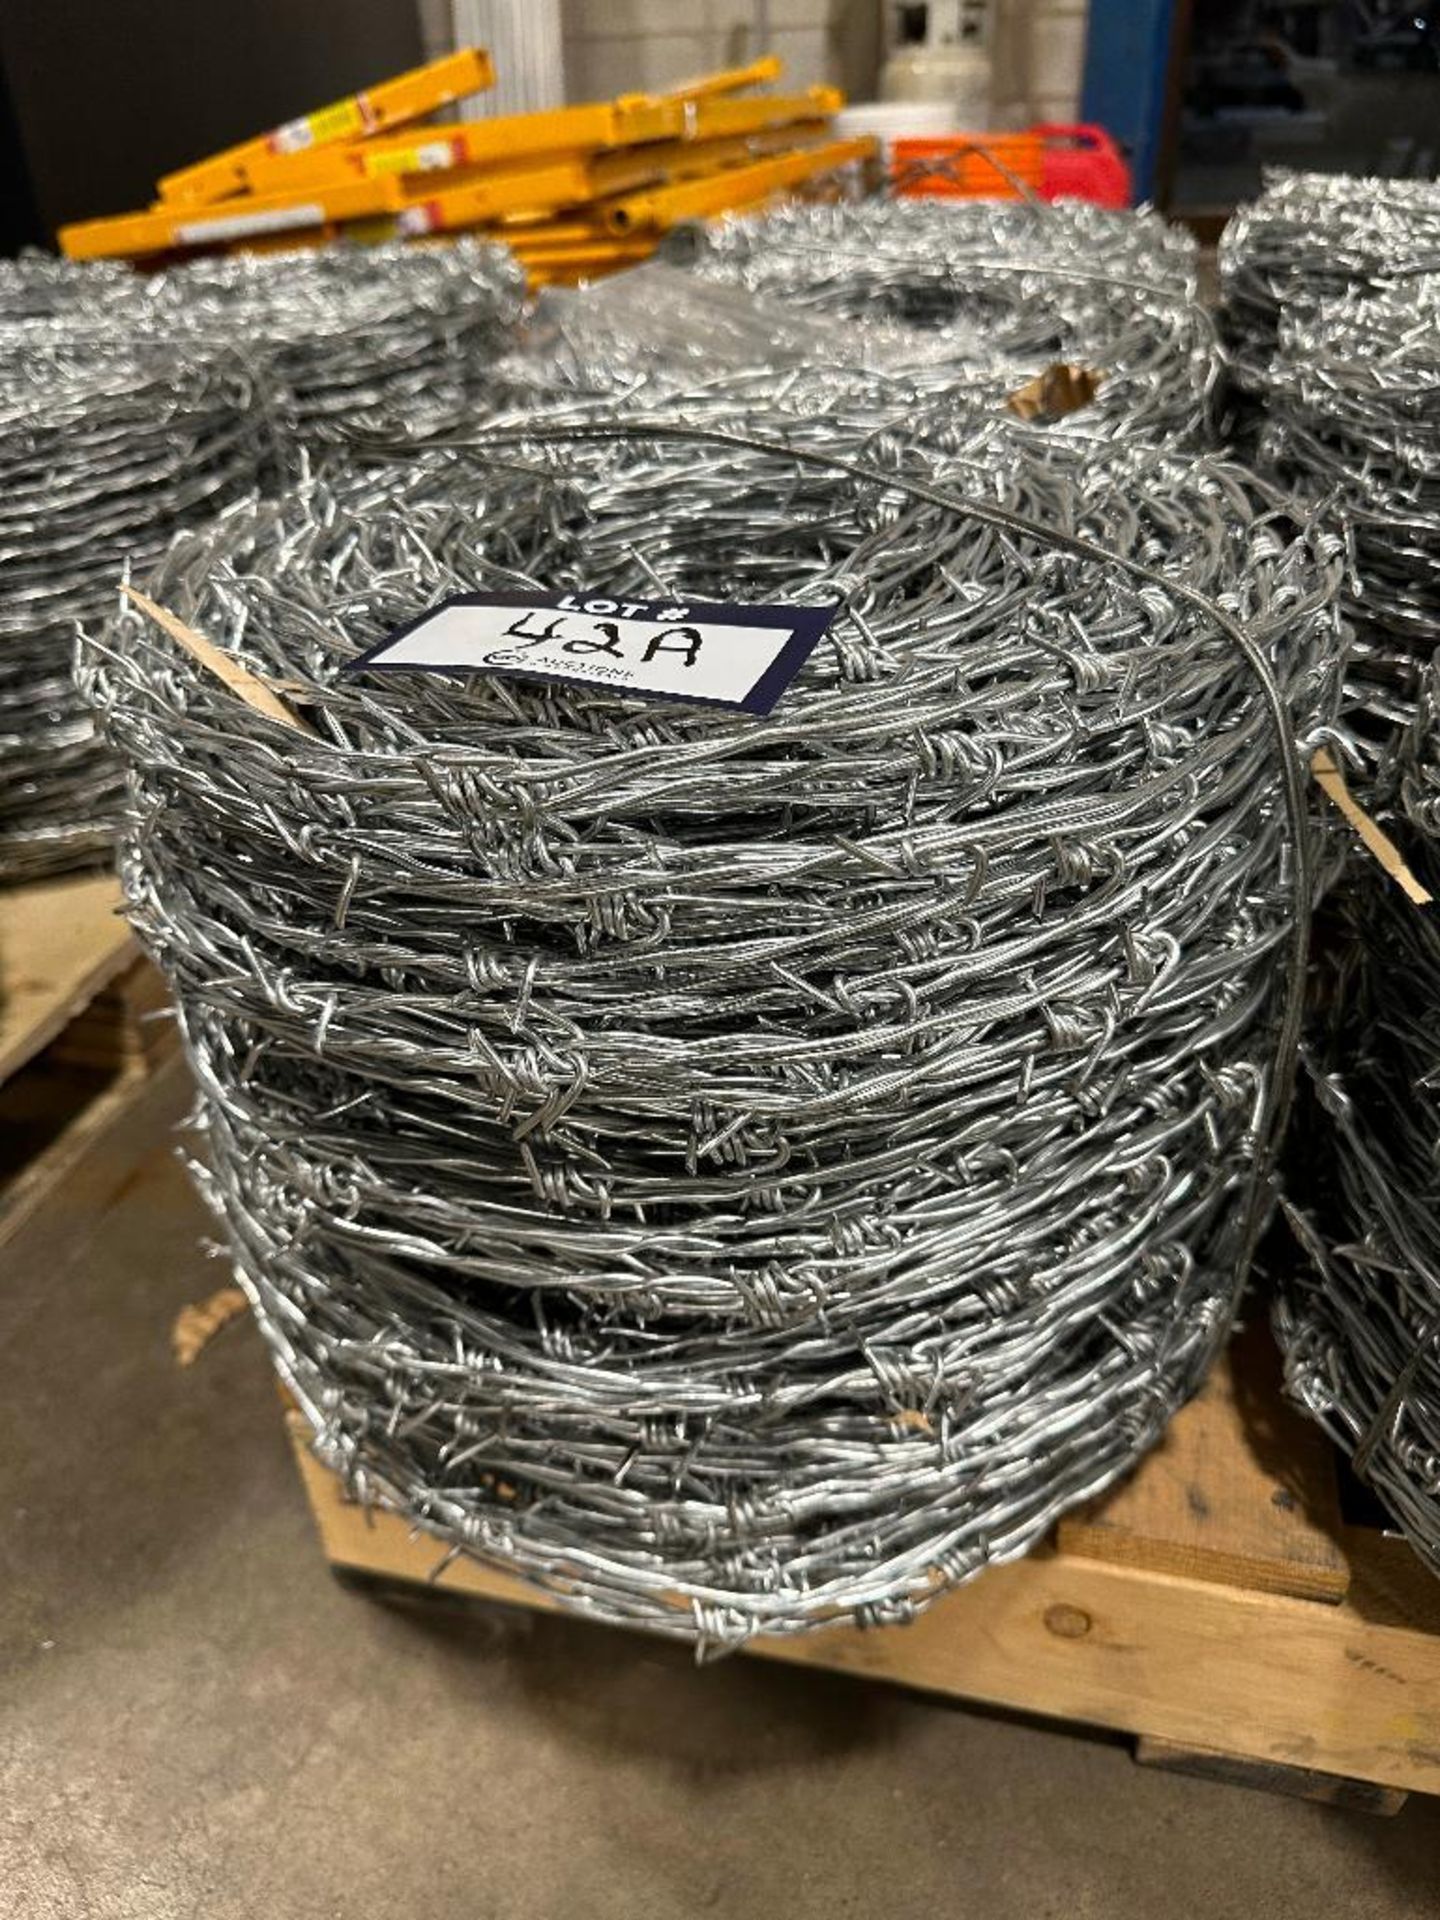 Lot of (3) 80lb. Rolls of Barbed Wire, Barb Spacing 6" - Image 3 of 3